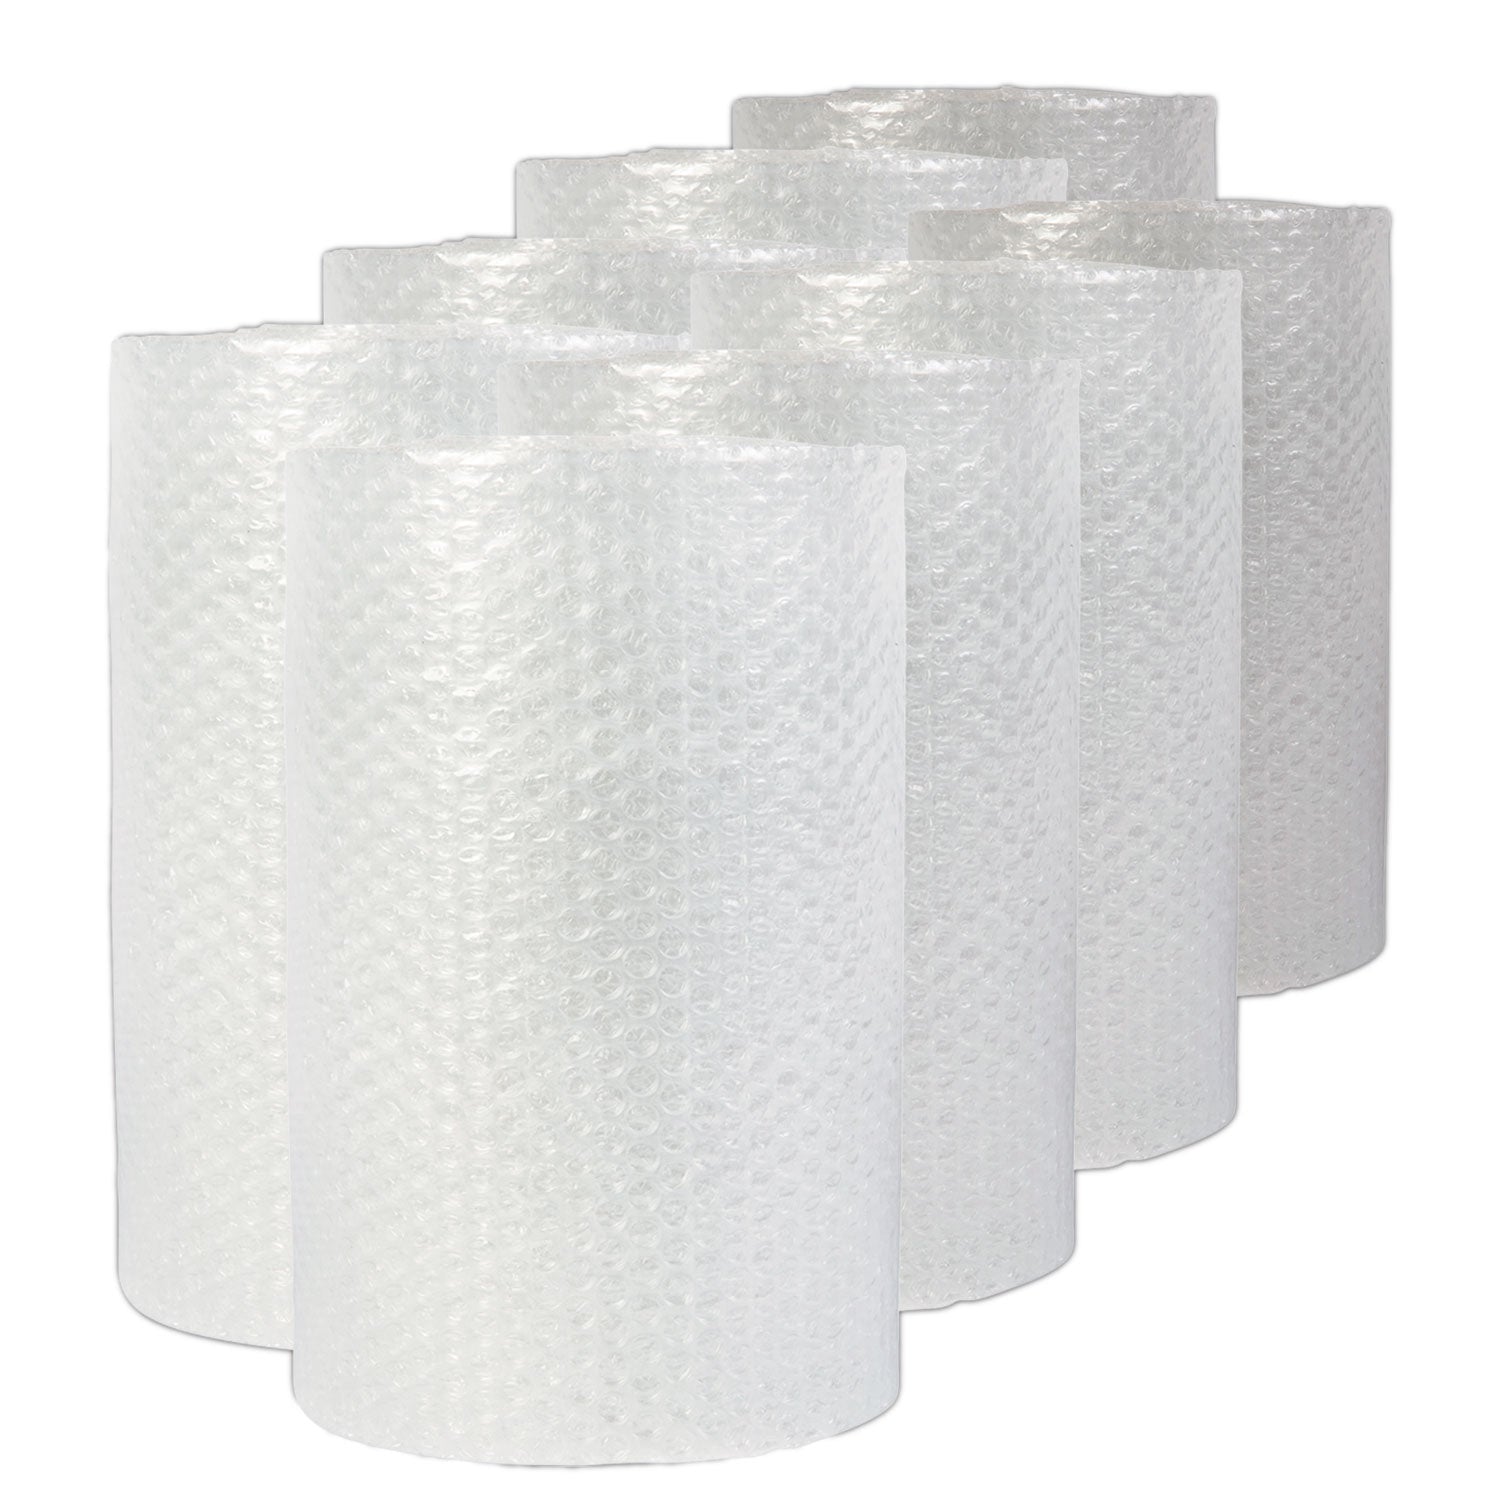 bubble-packaging-019-thick-24-x-50-ft-perforated-every-24-clear-8-carton_unv4087869 - 1